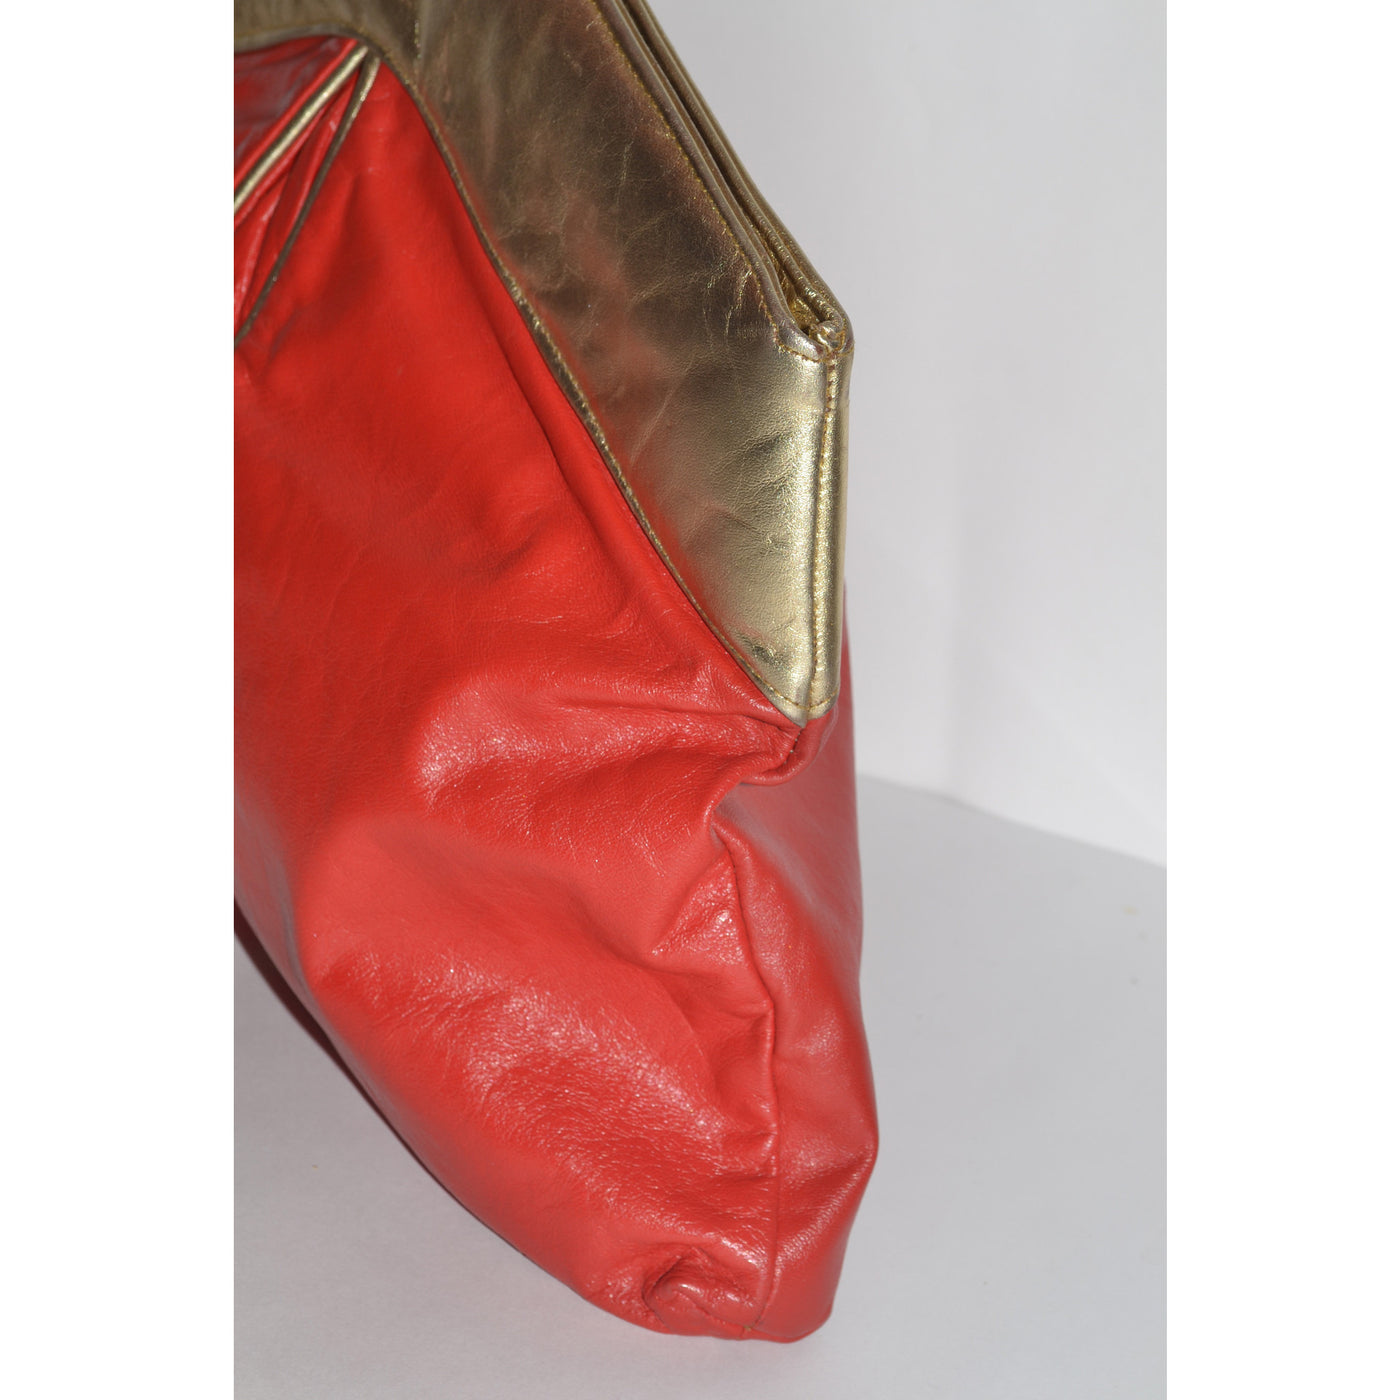 Vintage Oversized Red & Gold Clutch Purse